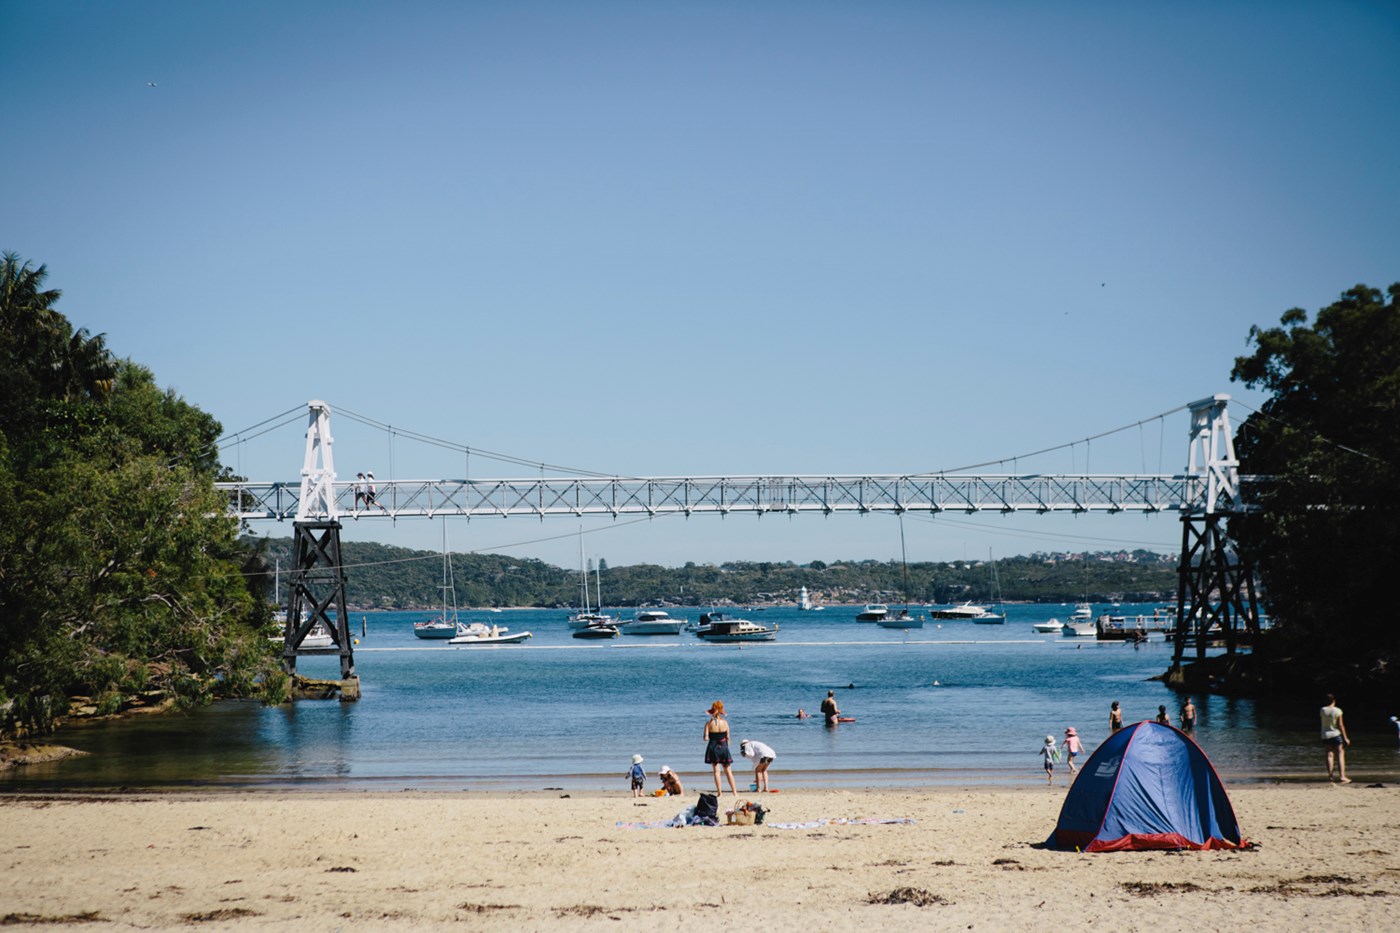 The large bridge runs across the beach at Parsley Bay as people play on the foreshore. 